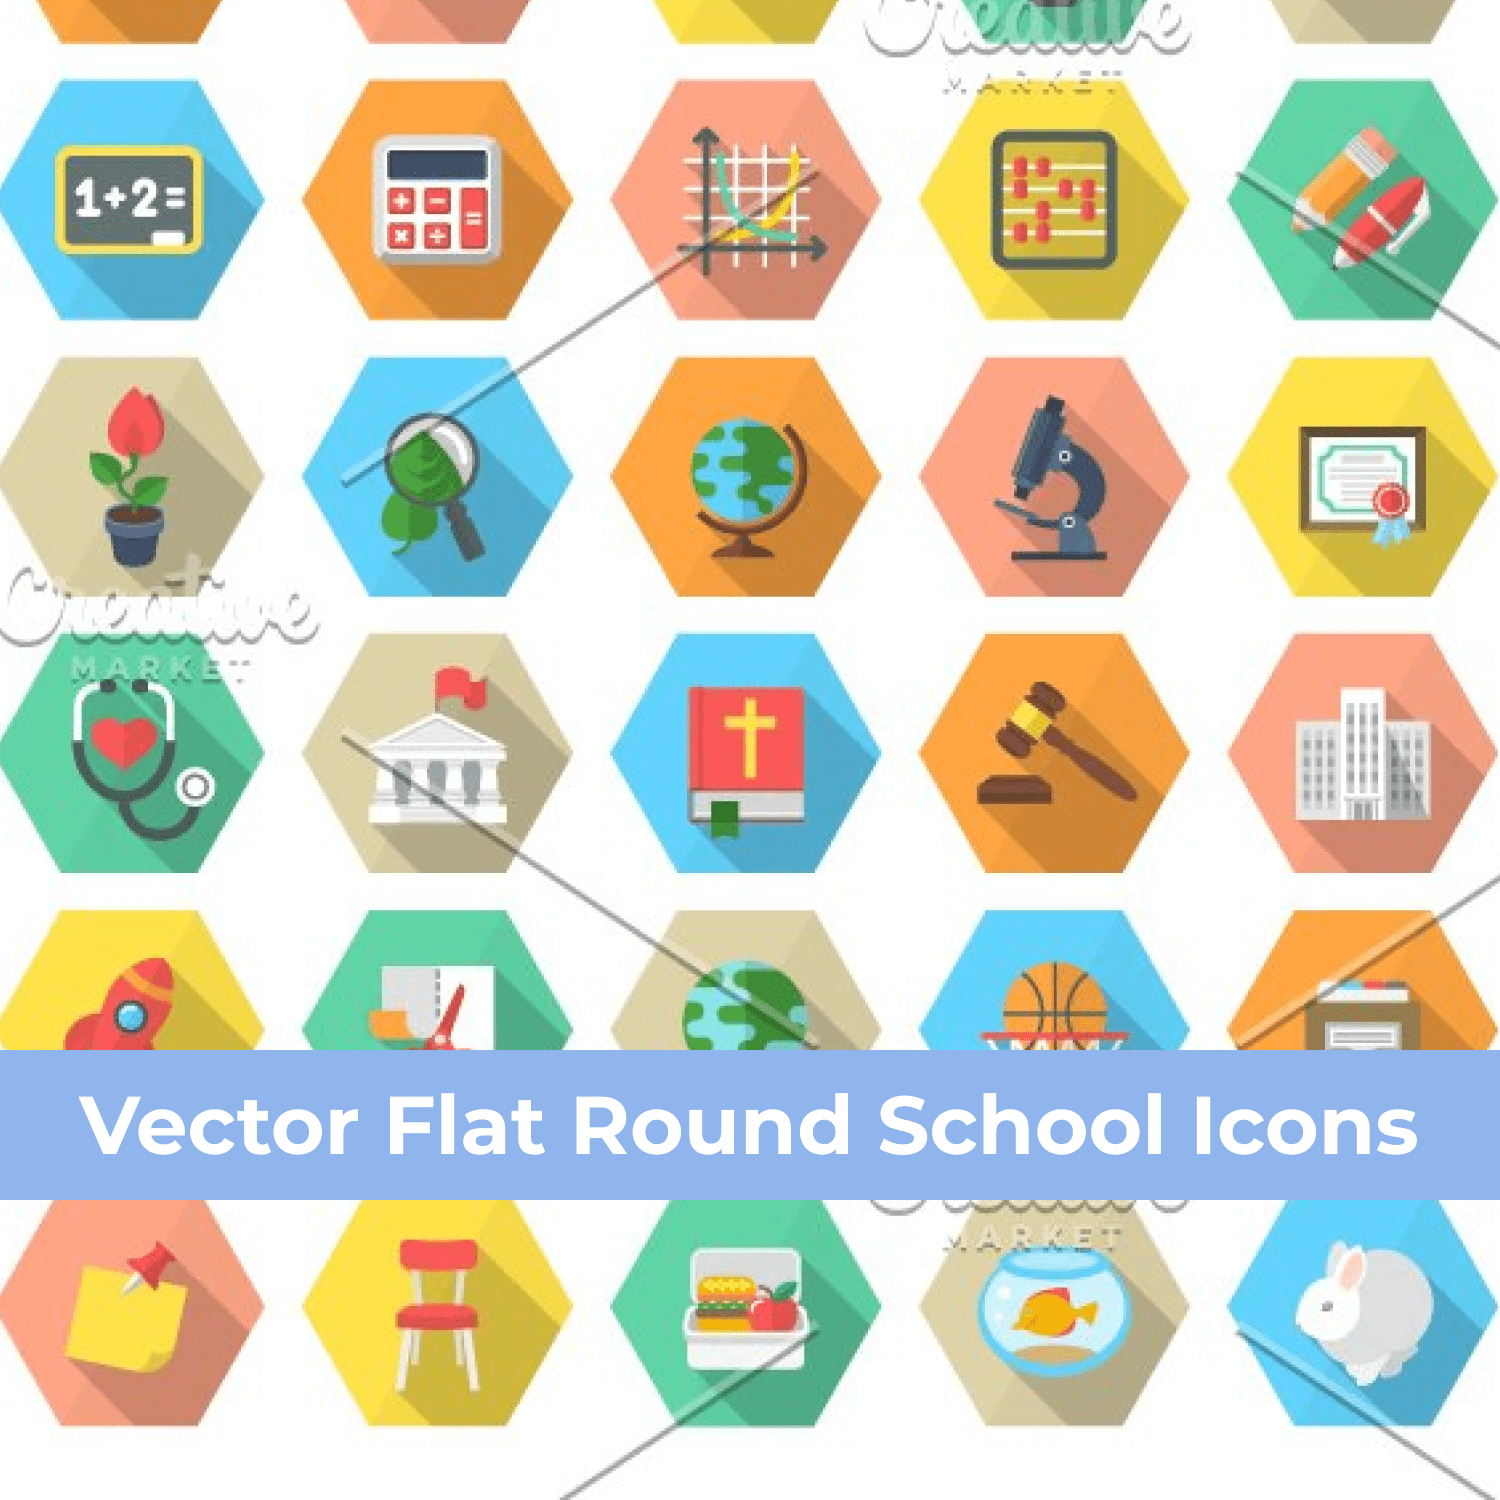 Vector Flat Round School Icons cover image.